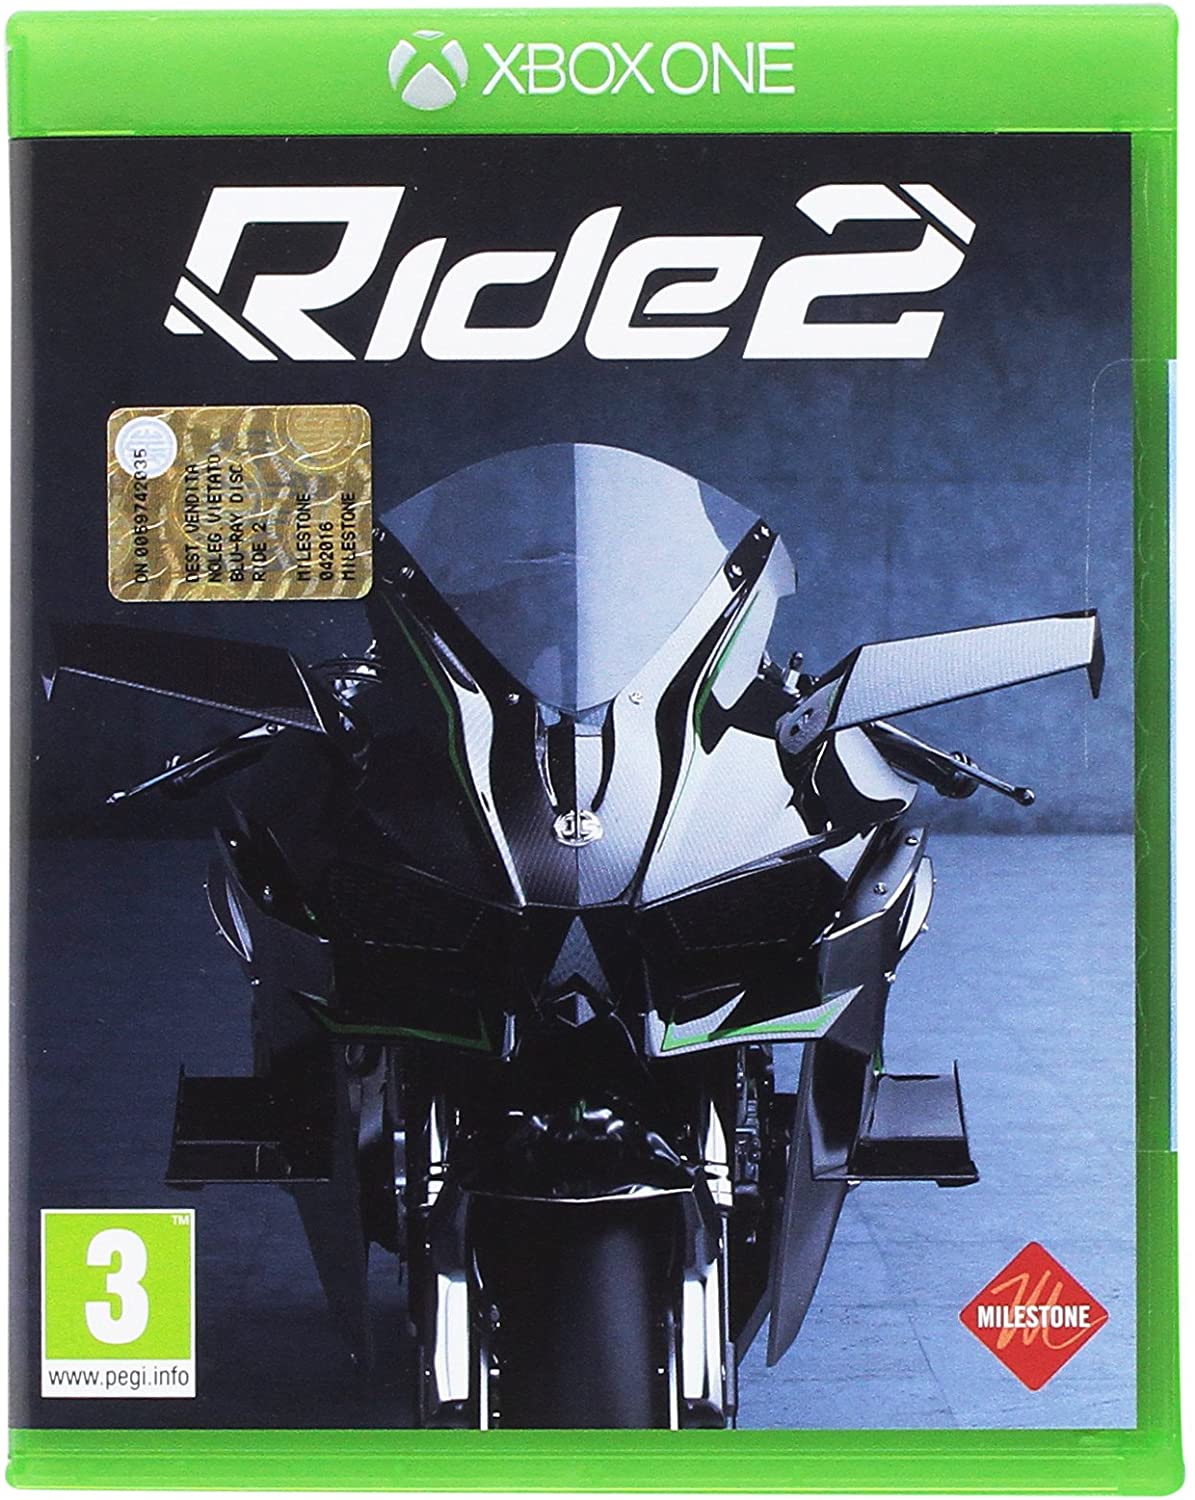 BRUGT - XboxOne - Ride 2 - Toys'N'Loot